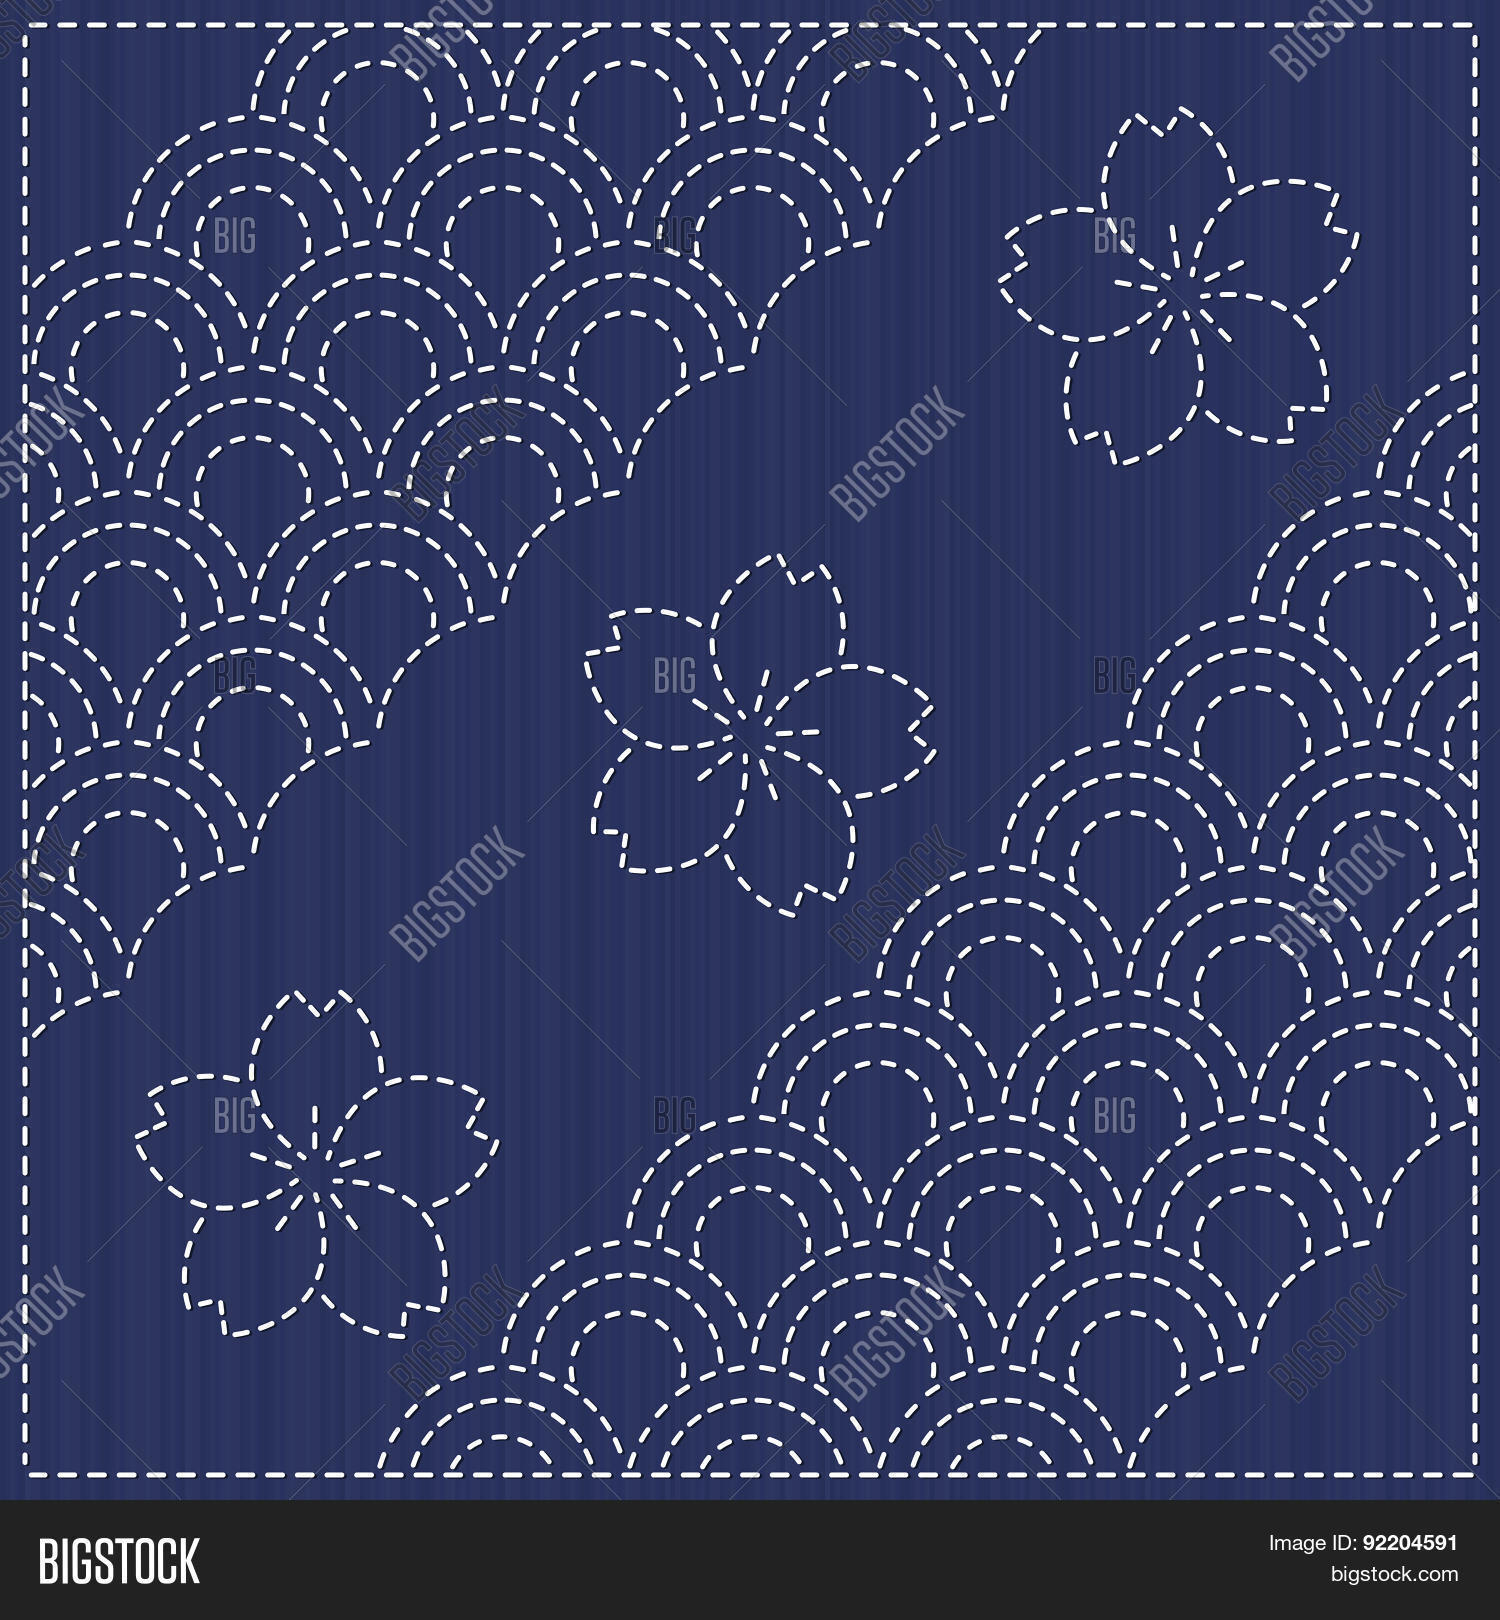 Sashiko Embroidery Patterns Free Traditional Japanese Vector Photo Free Trial Bigstock